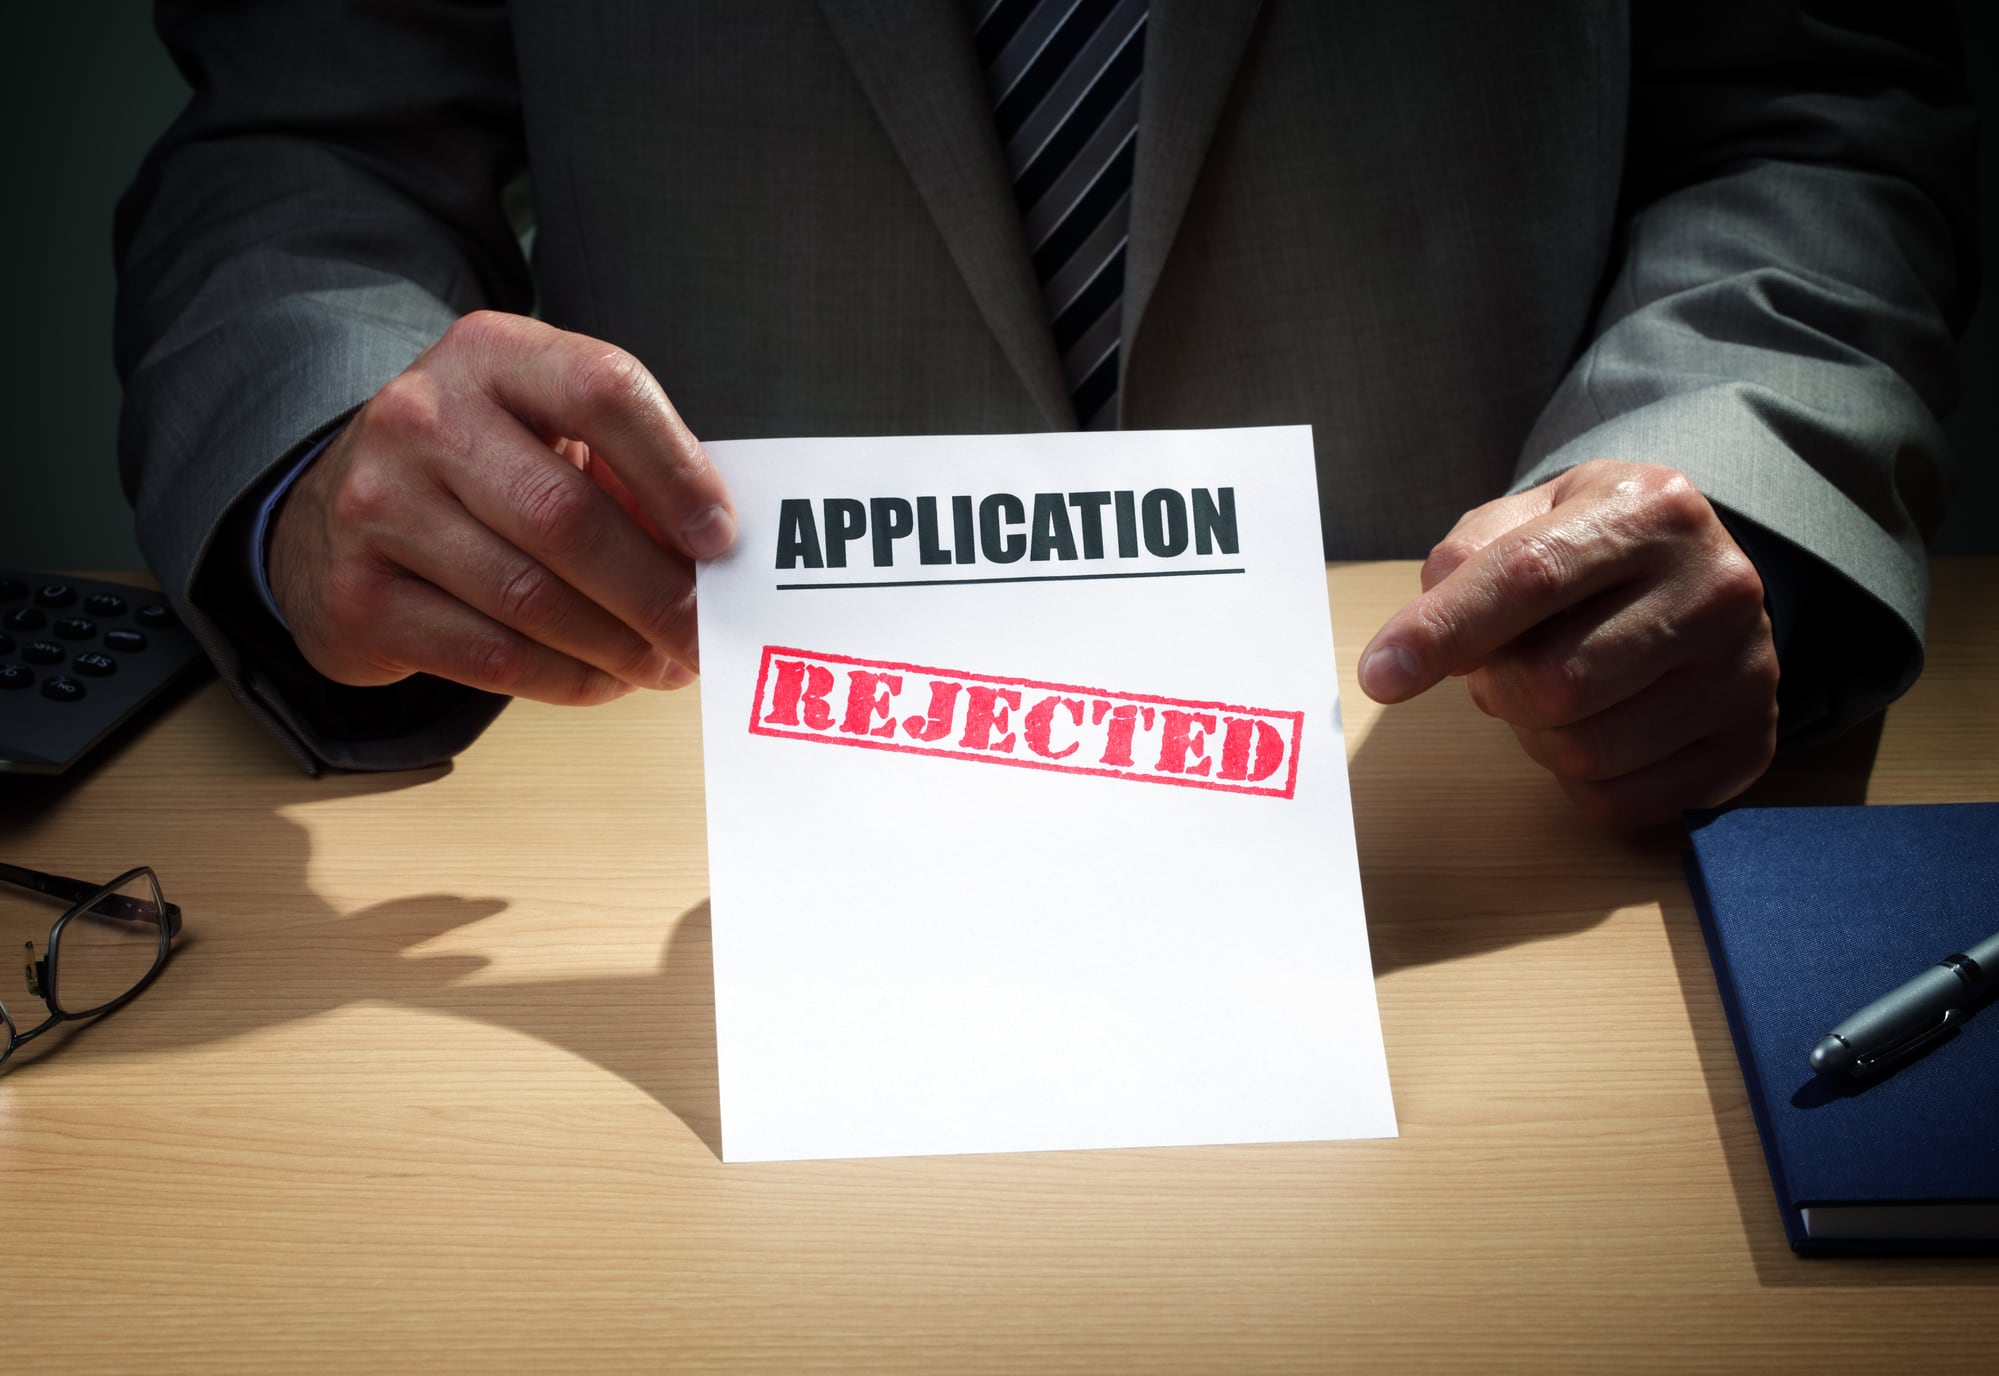 How to reply to job rejection with astonishing grace